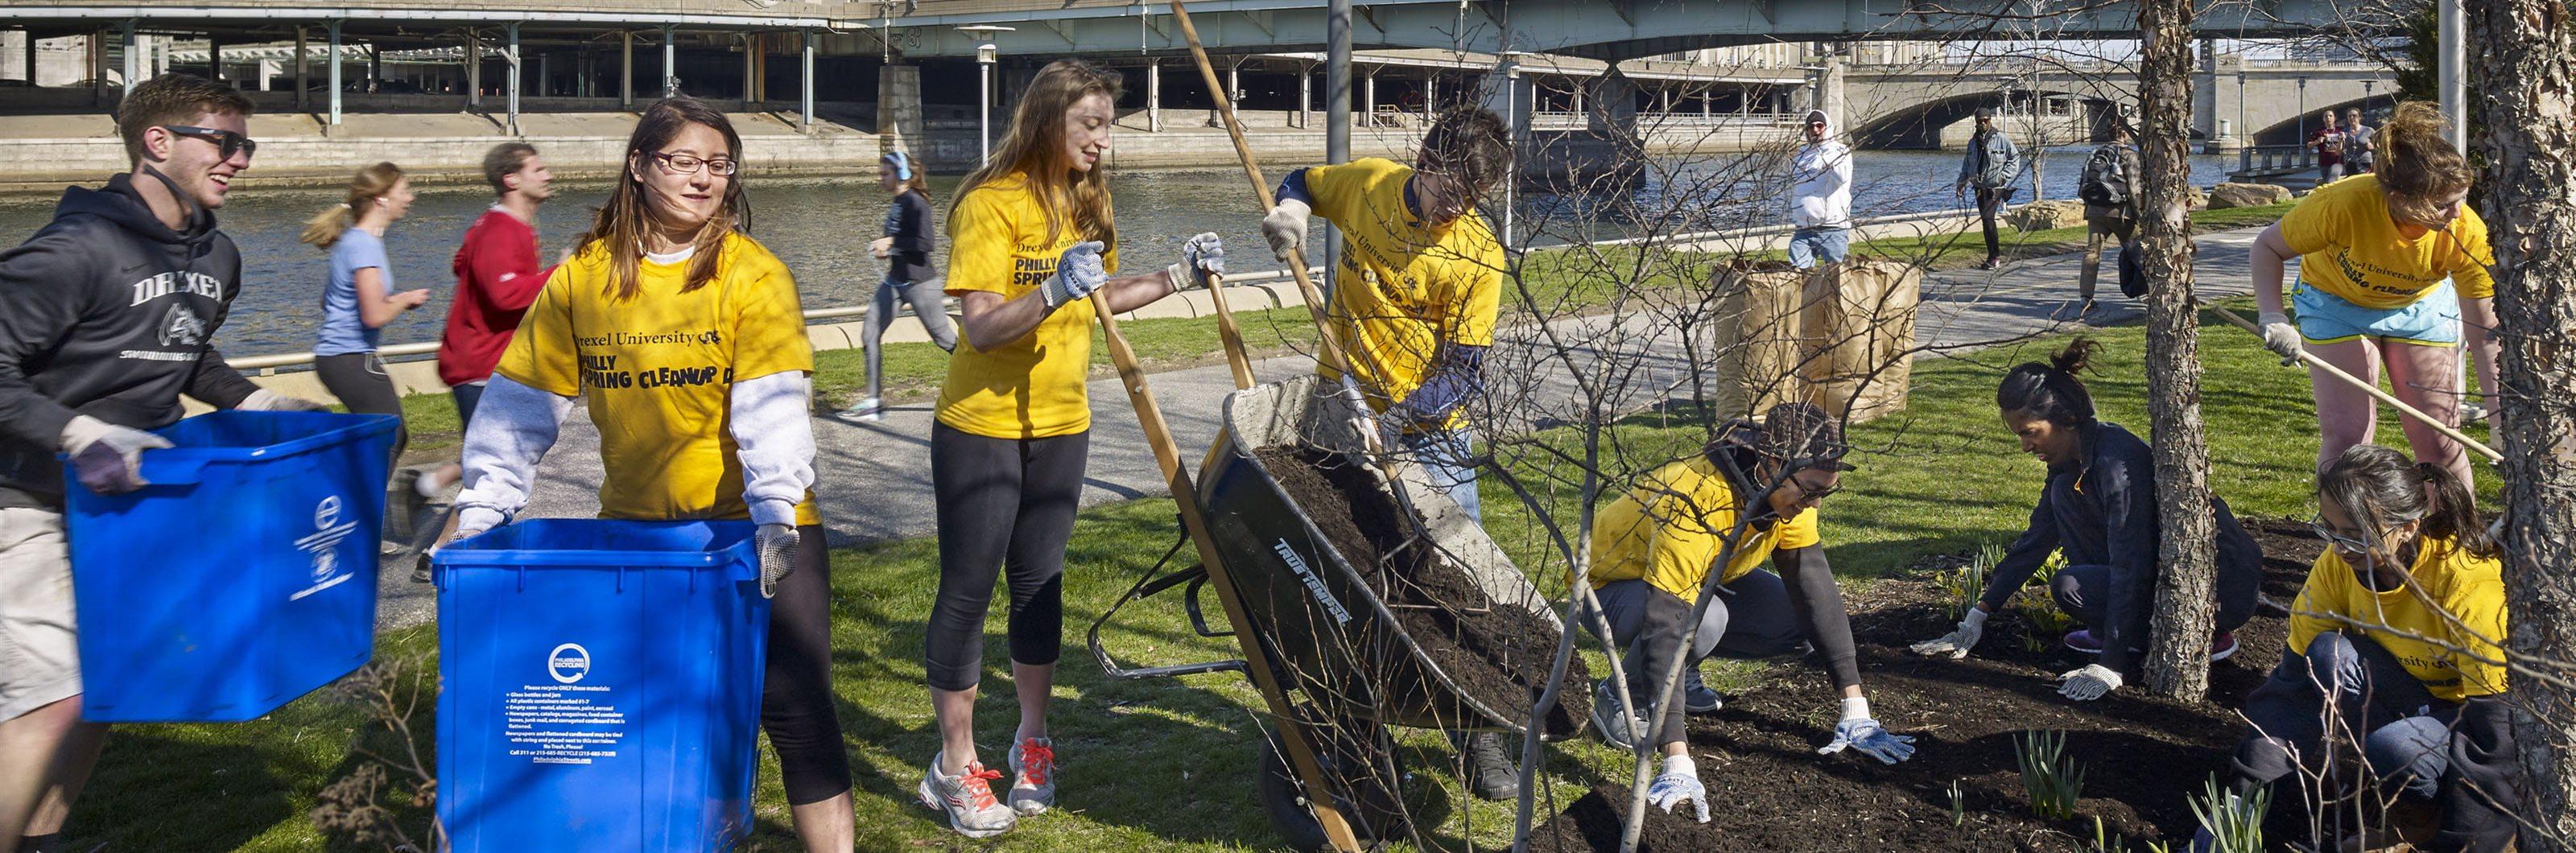 Student-volunteers planting and cleaning new beds along the Schuylkill River